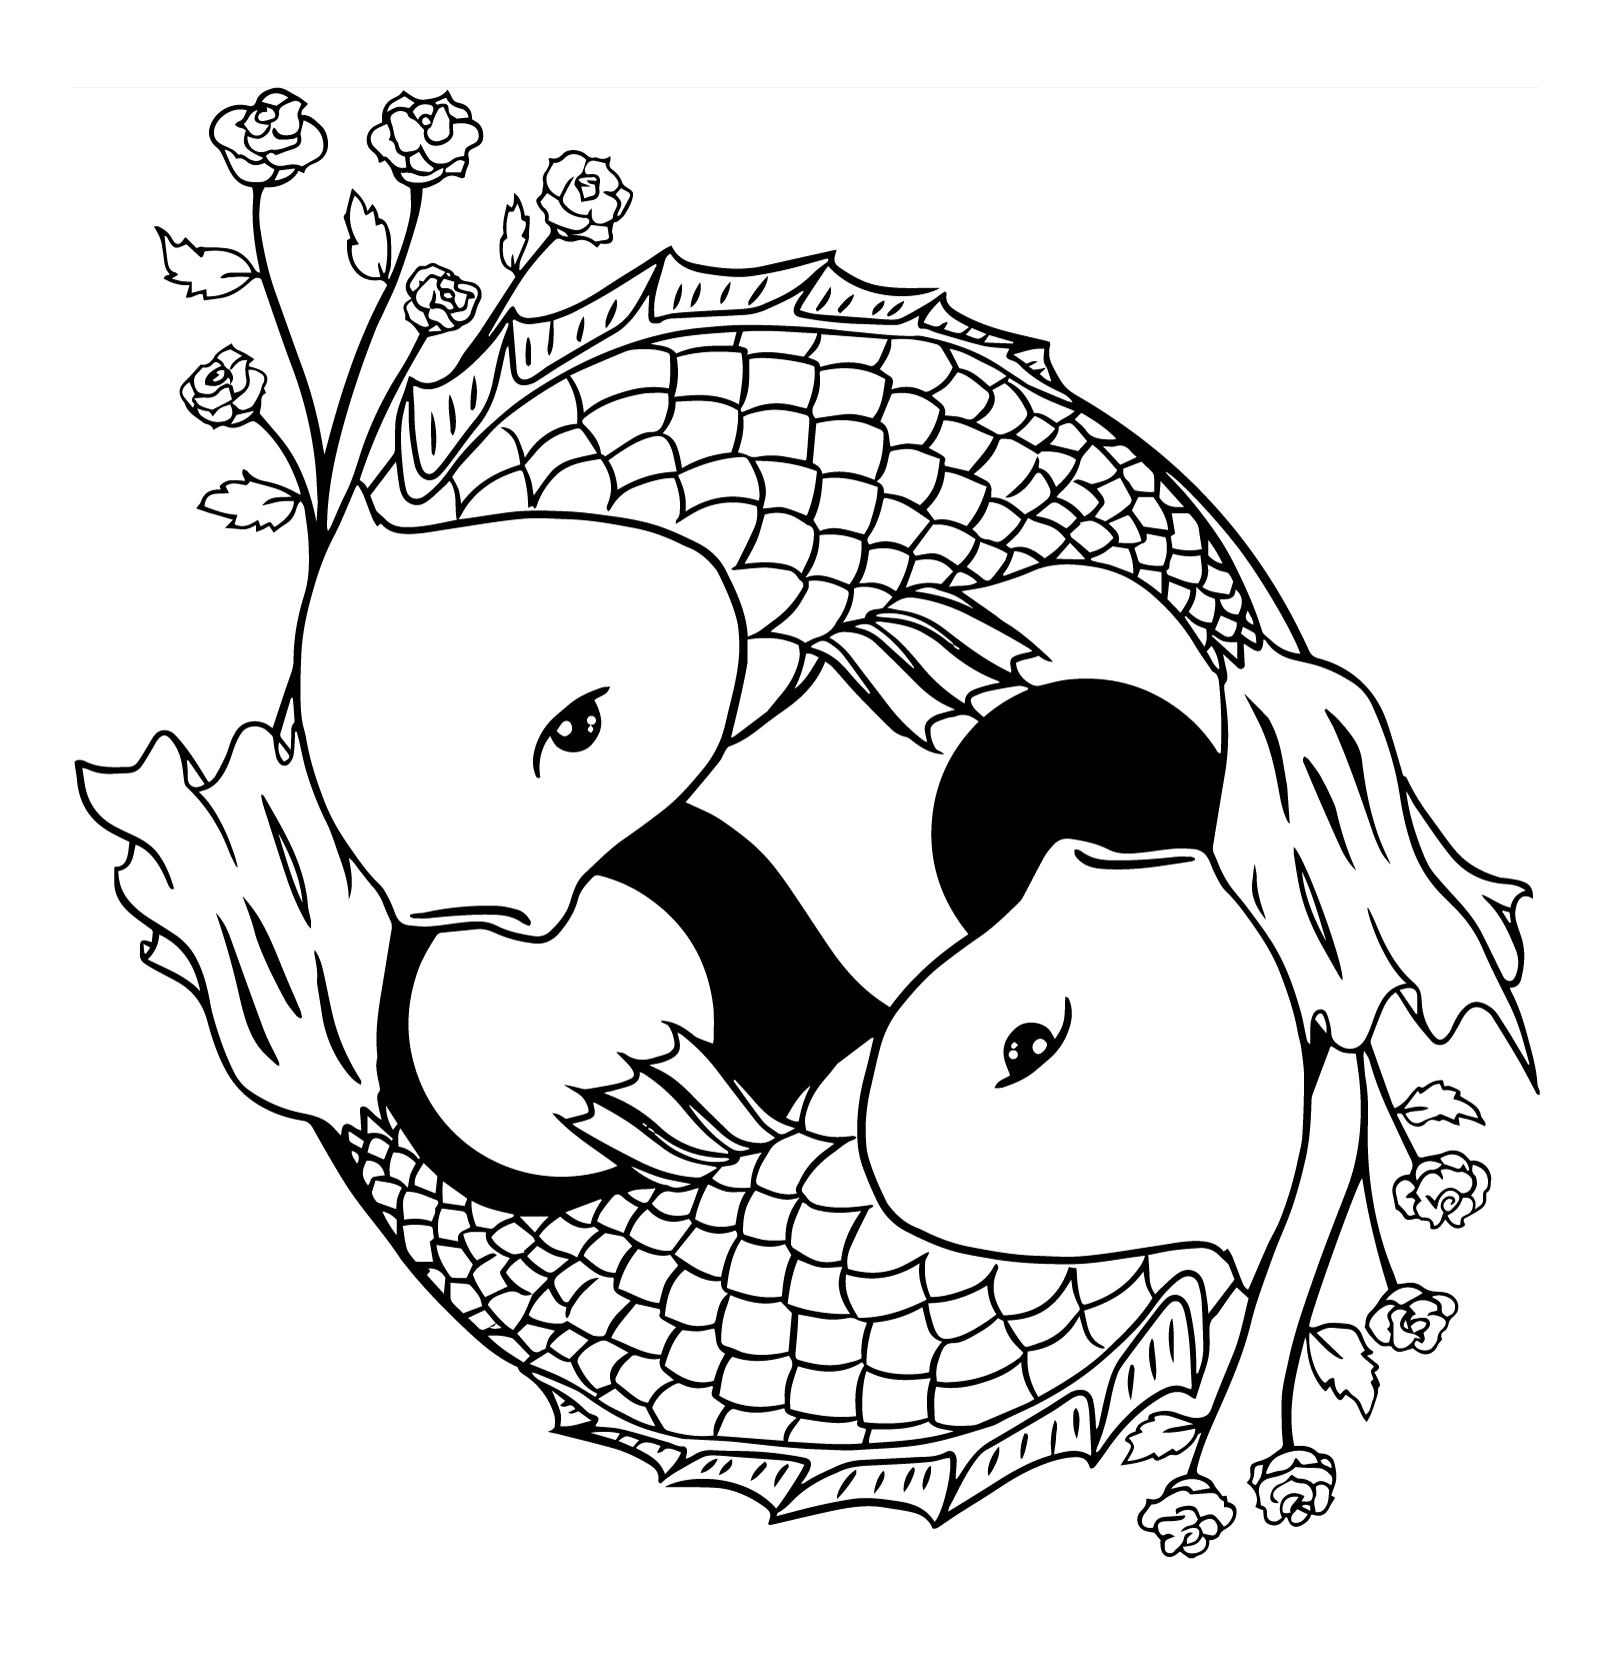 Koi Fish Colouring Pages - High Quality Coloring Pages